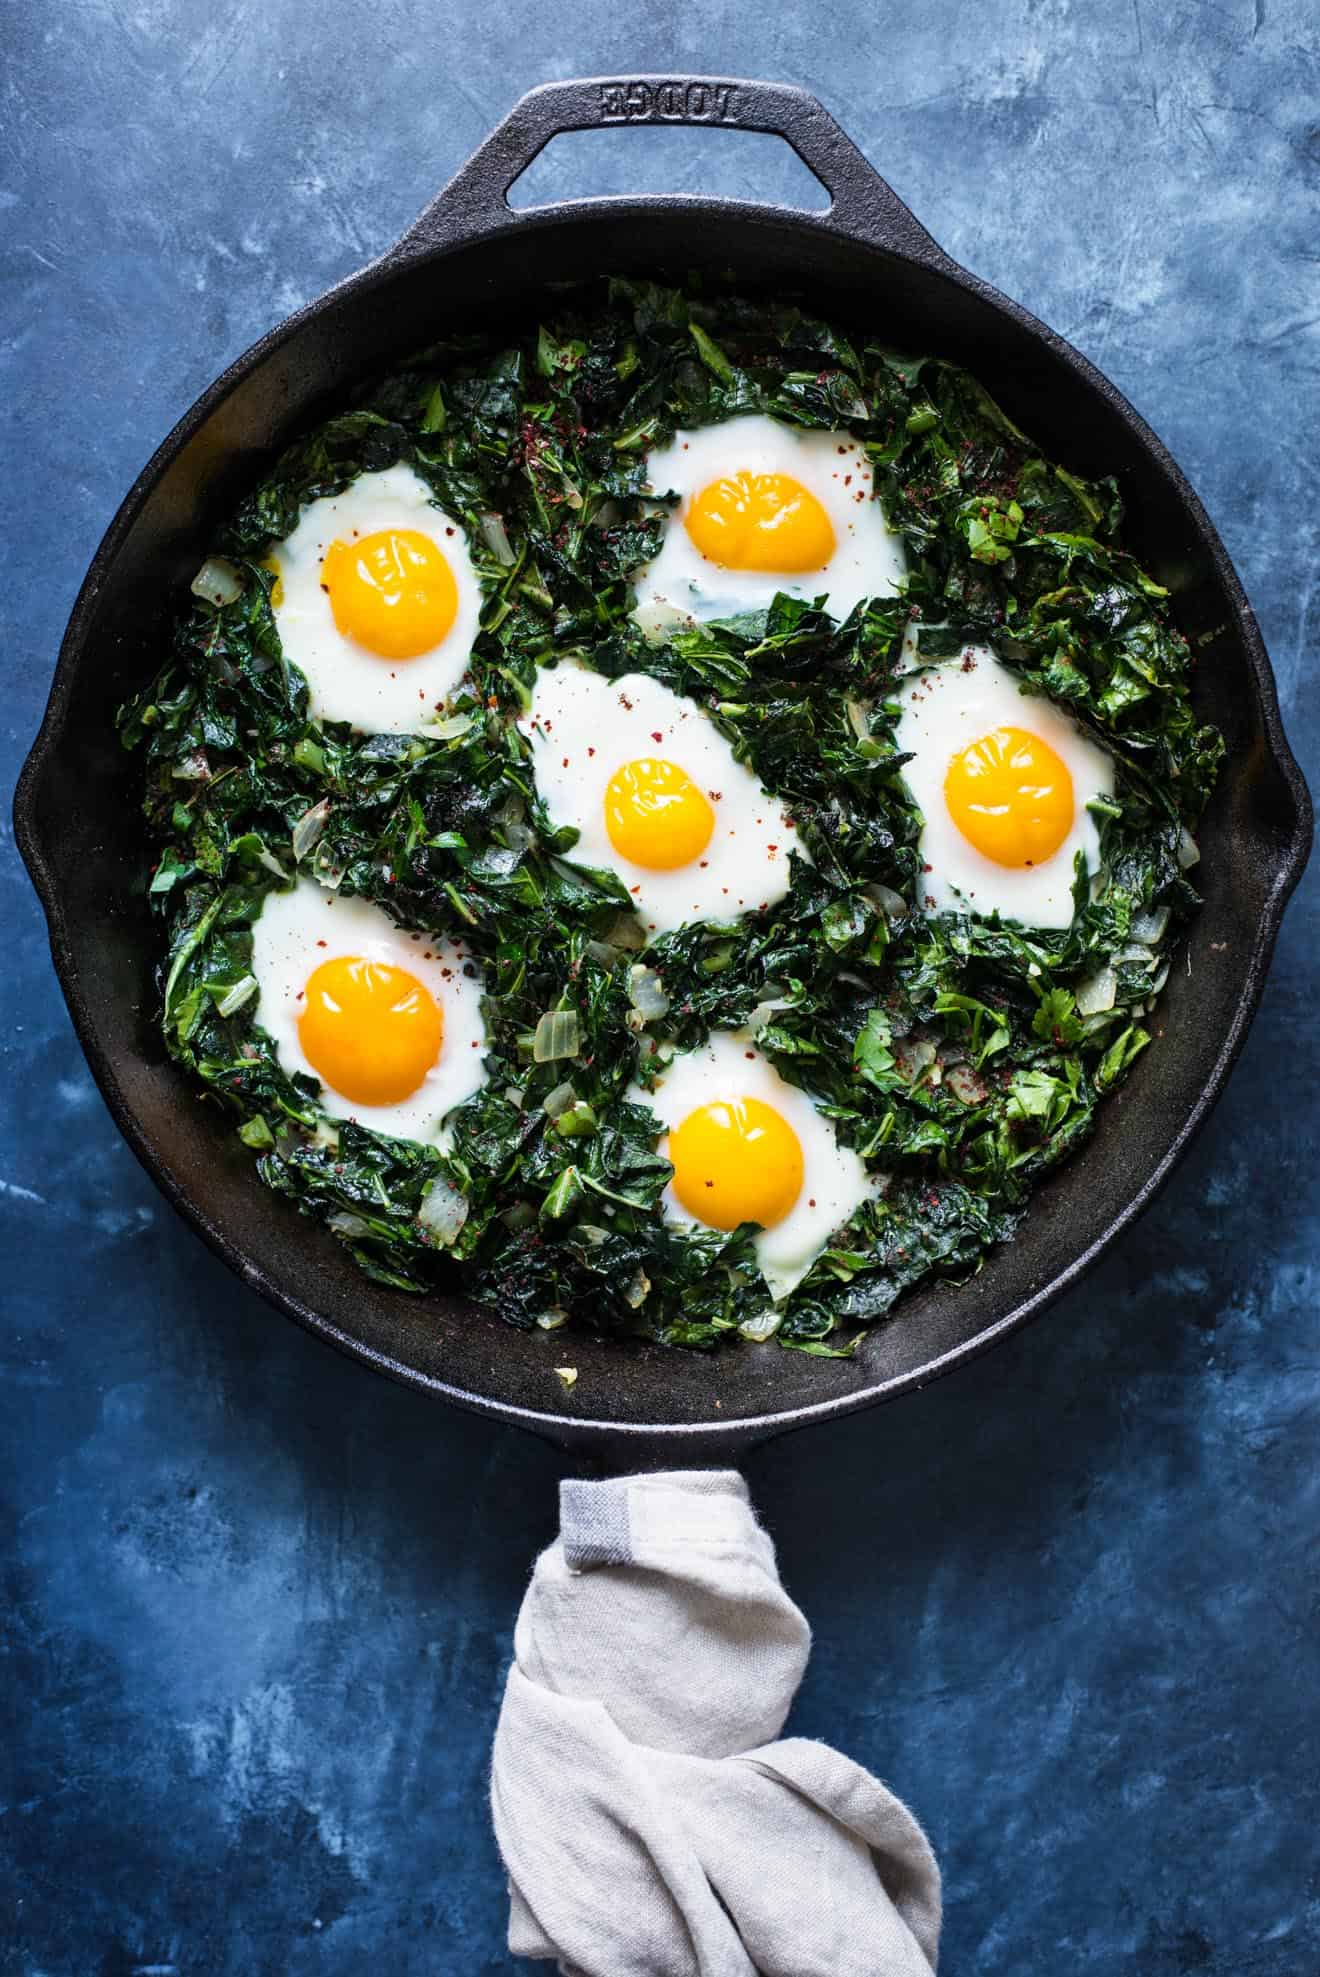 Green Shakshuka - a healthy breakfast dish filled with kale, collard greens and sunny side up eggs. An easy gluten-free meal!